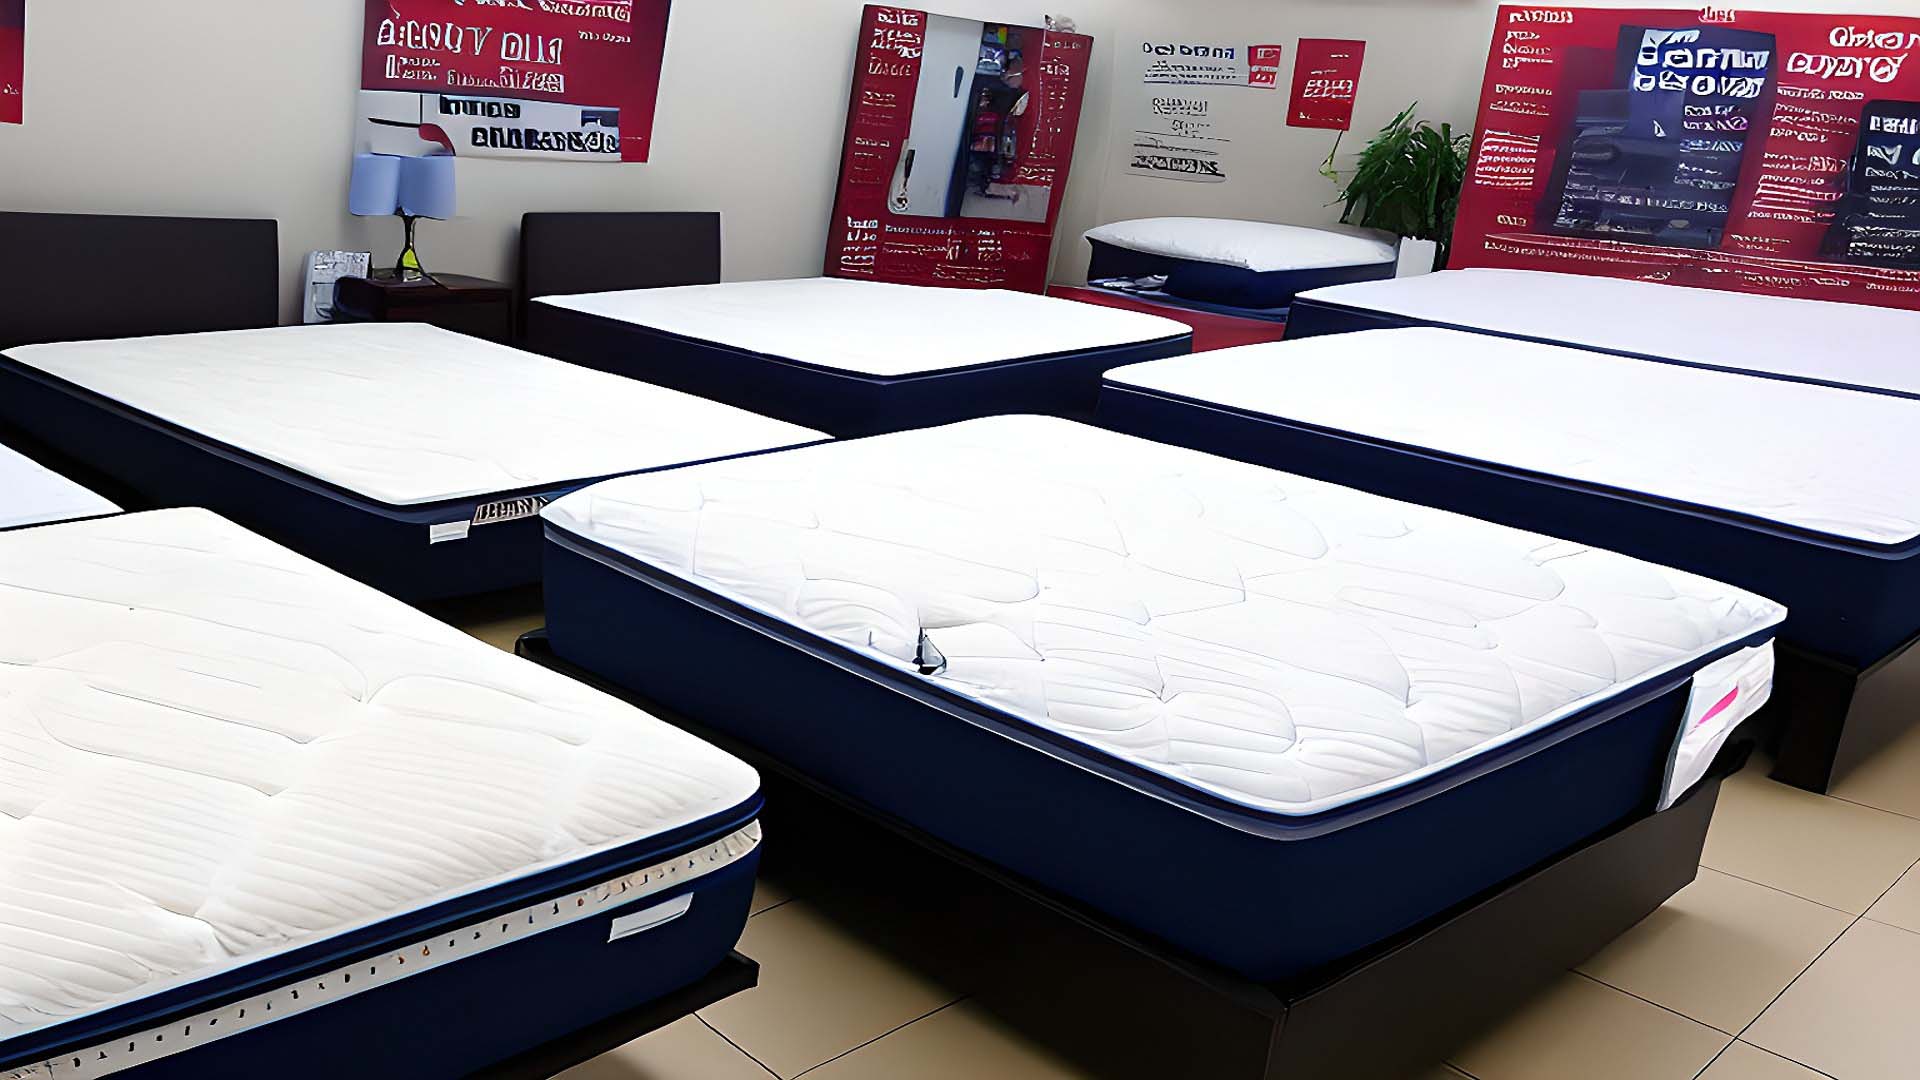 Mattress By Appointment in Boise, Idaho 83701